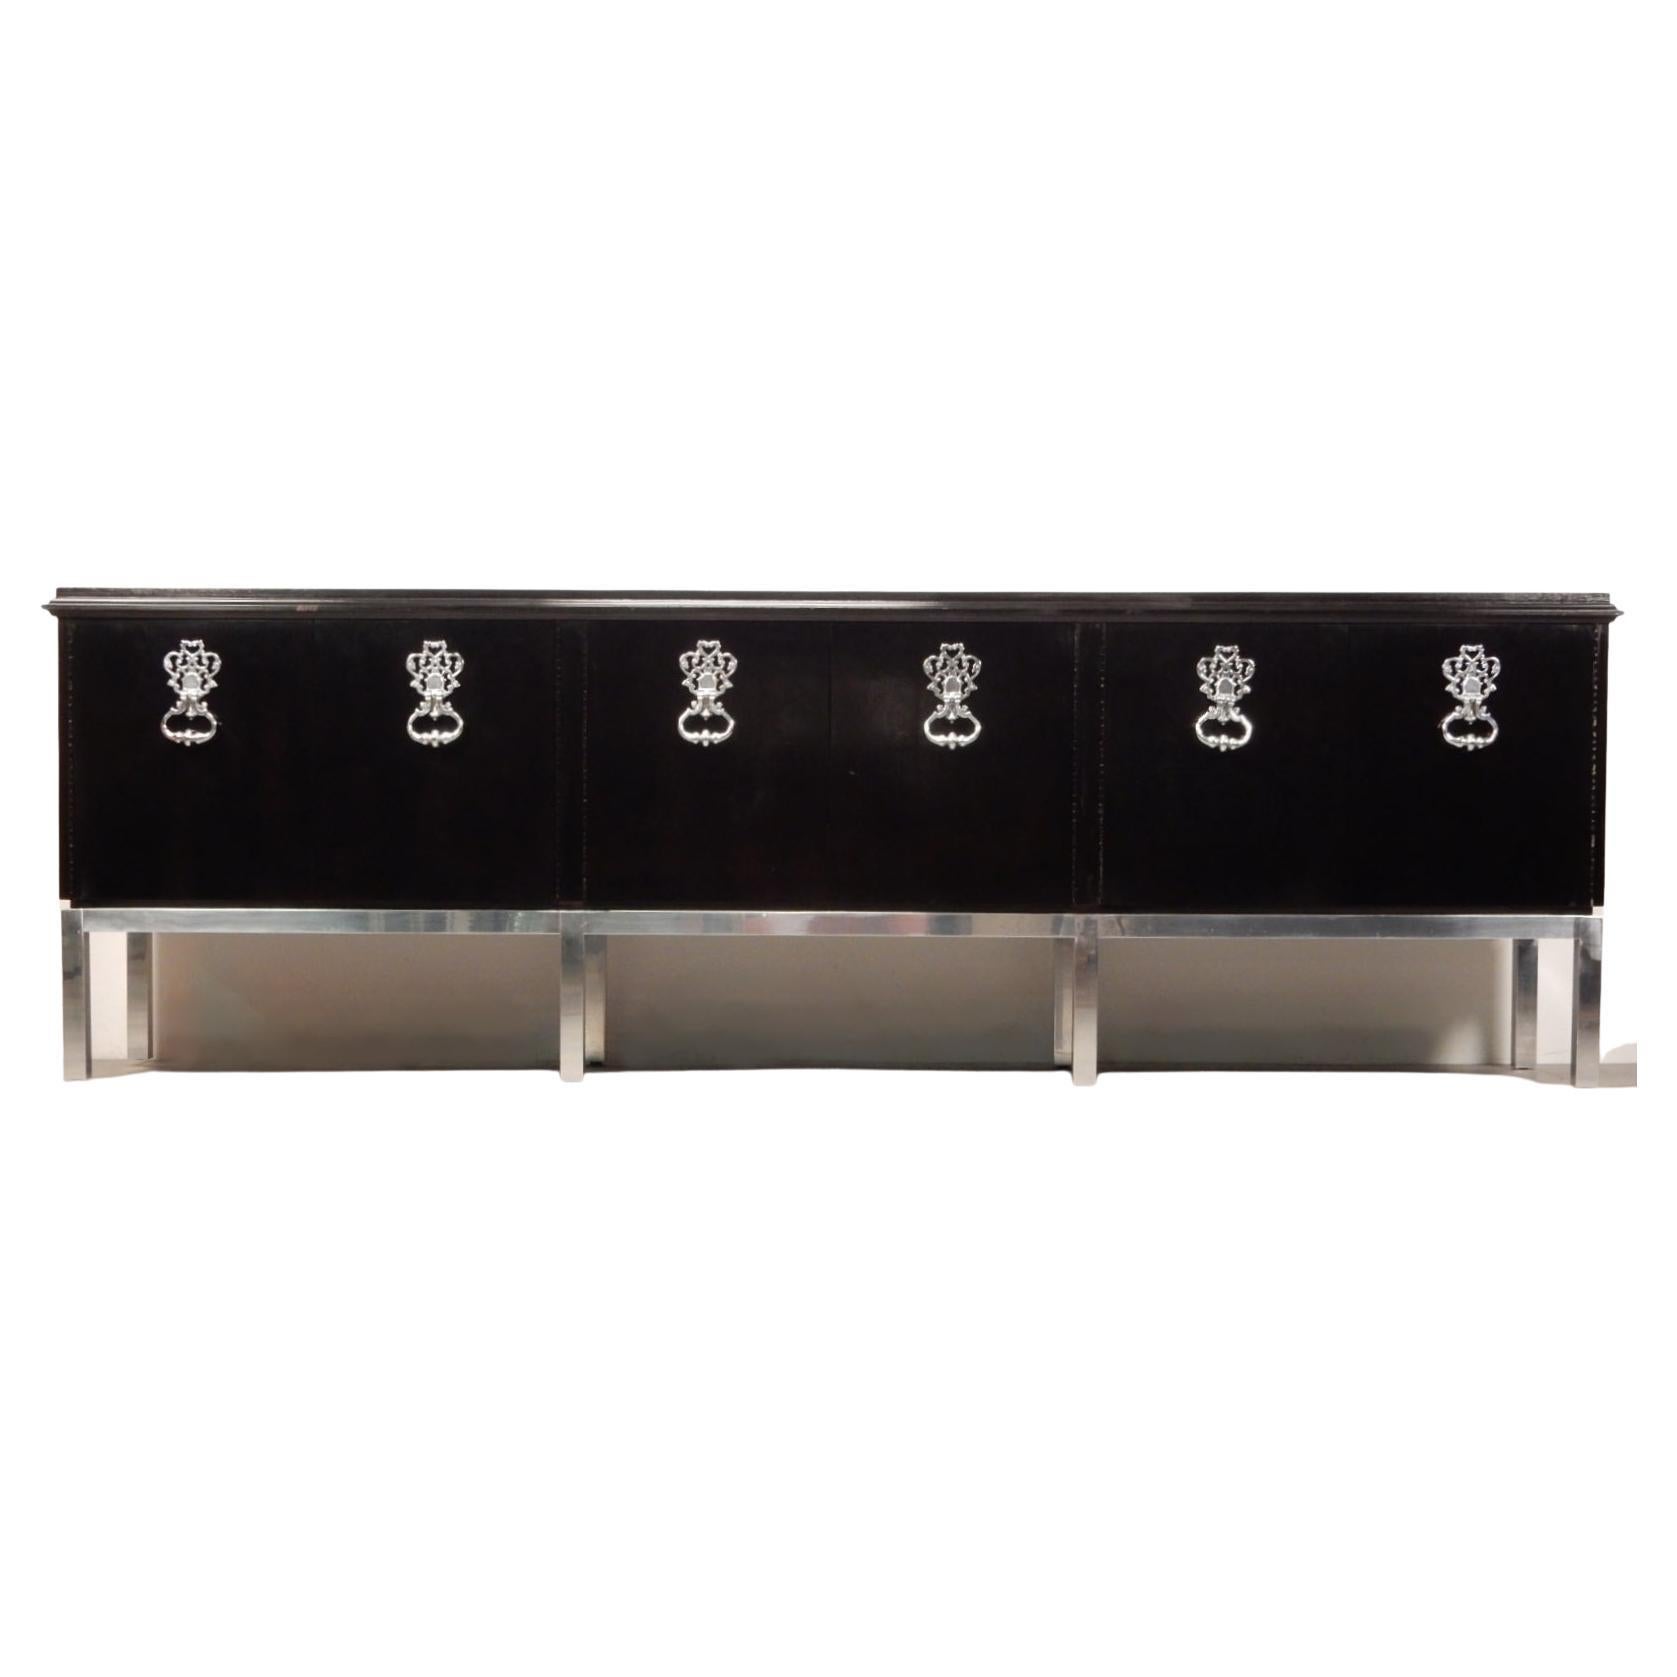 8 foot Lacquered Credenza Cabinet in Style of Tommi Parzinger For Sale